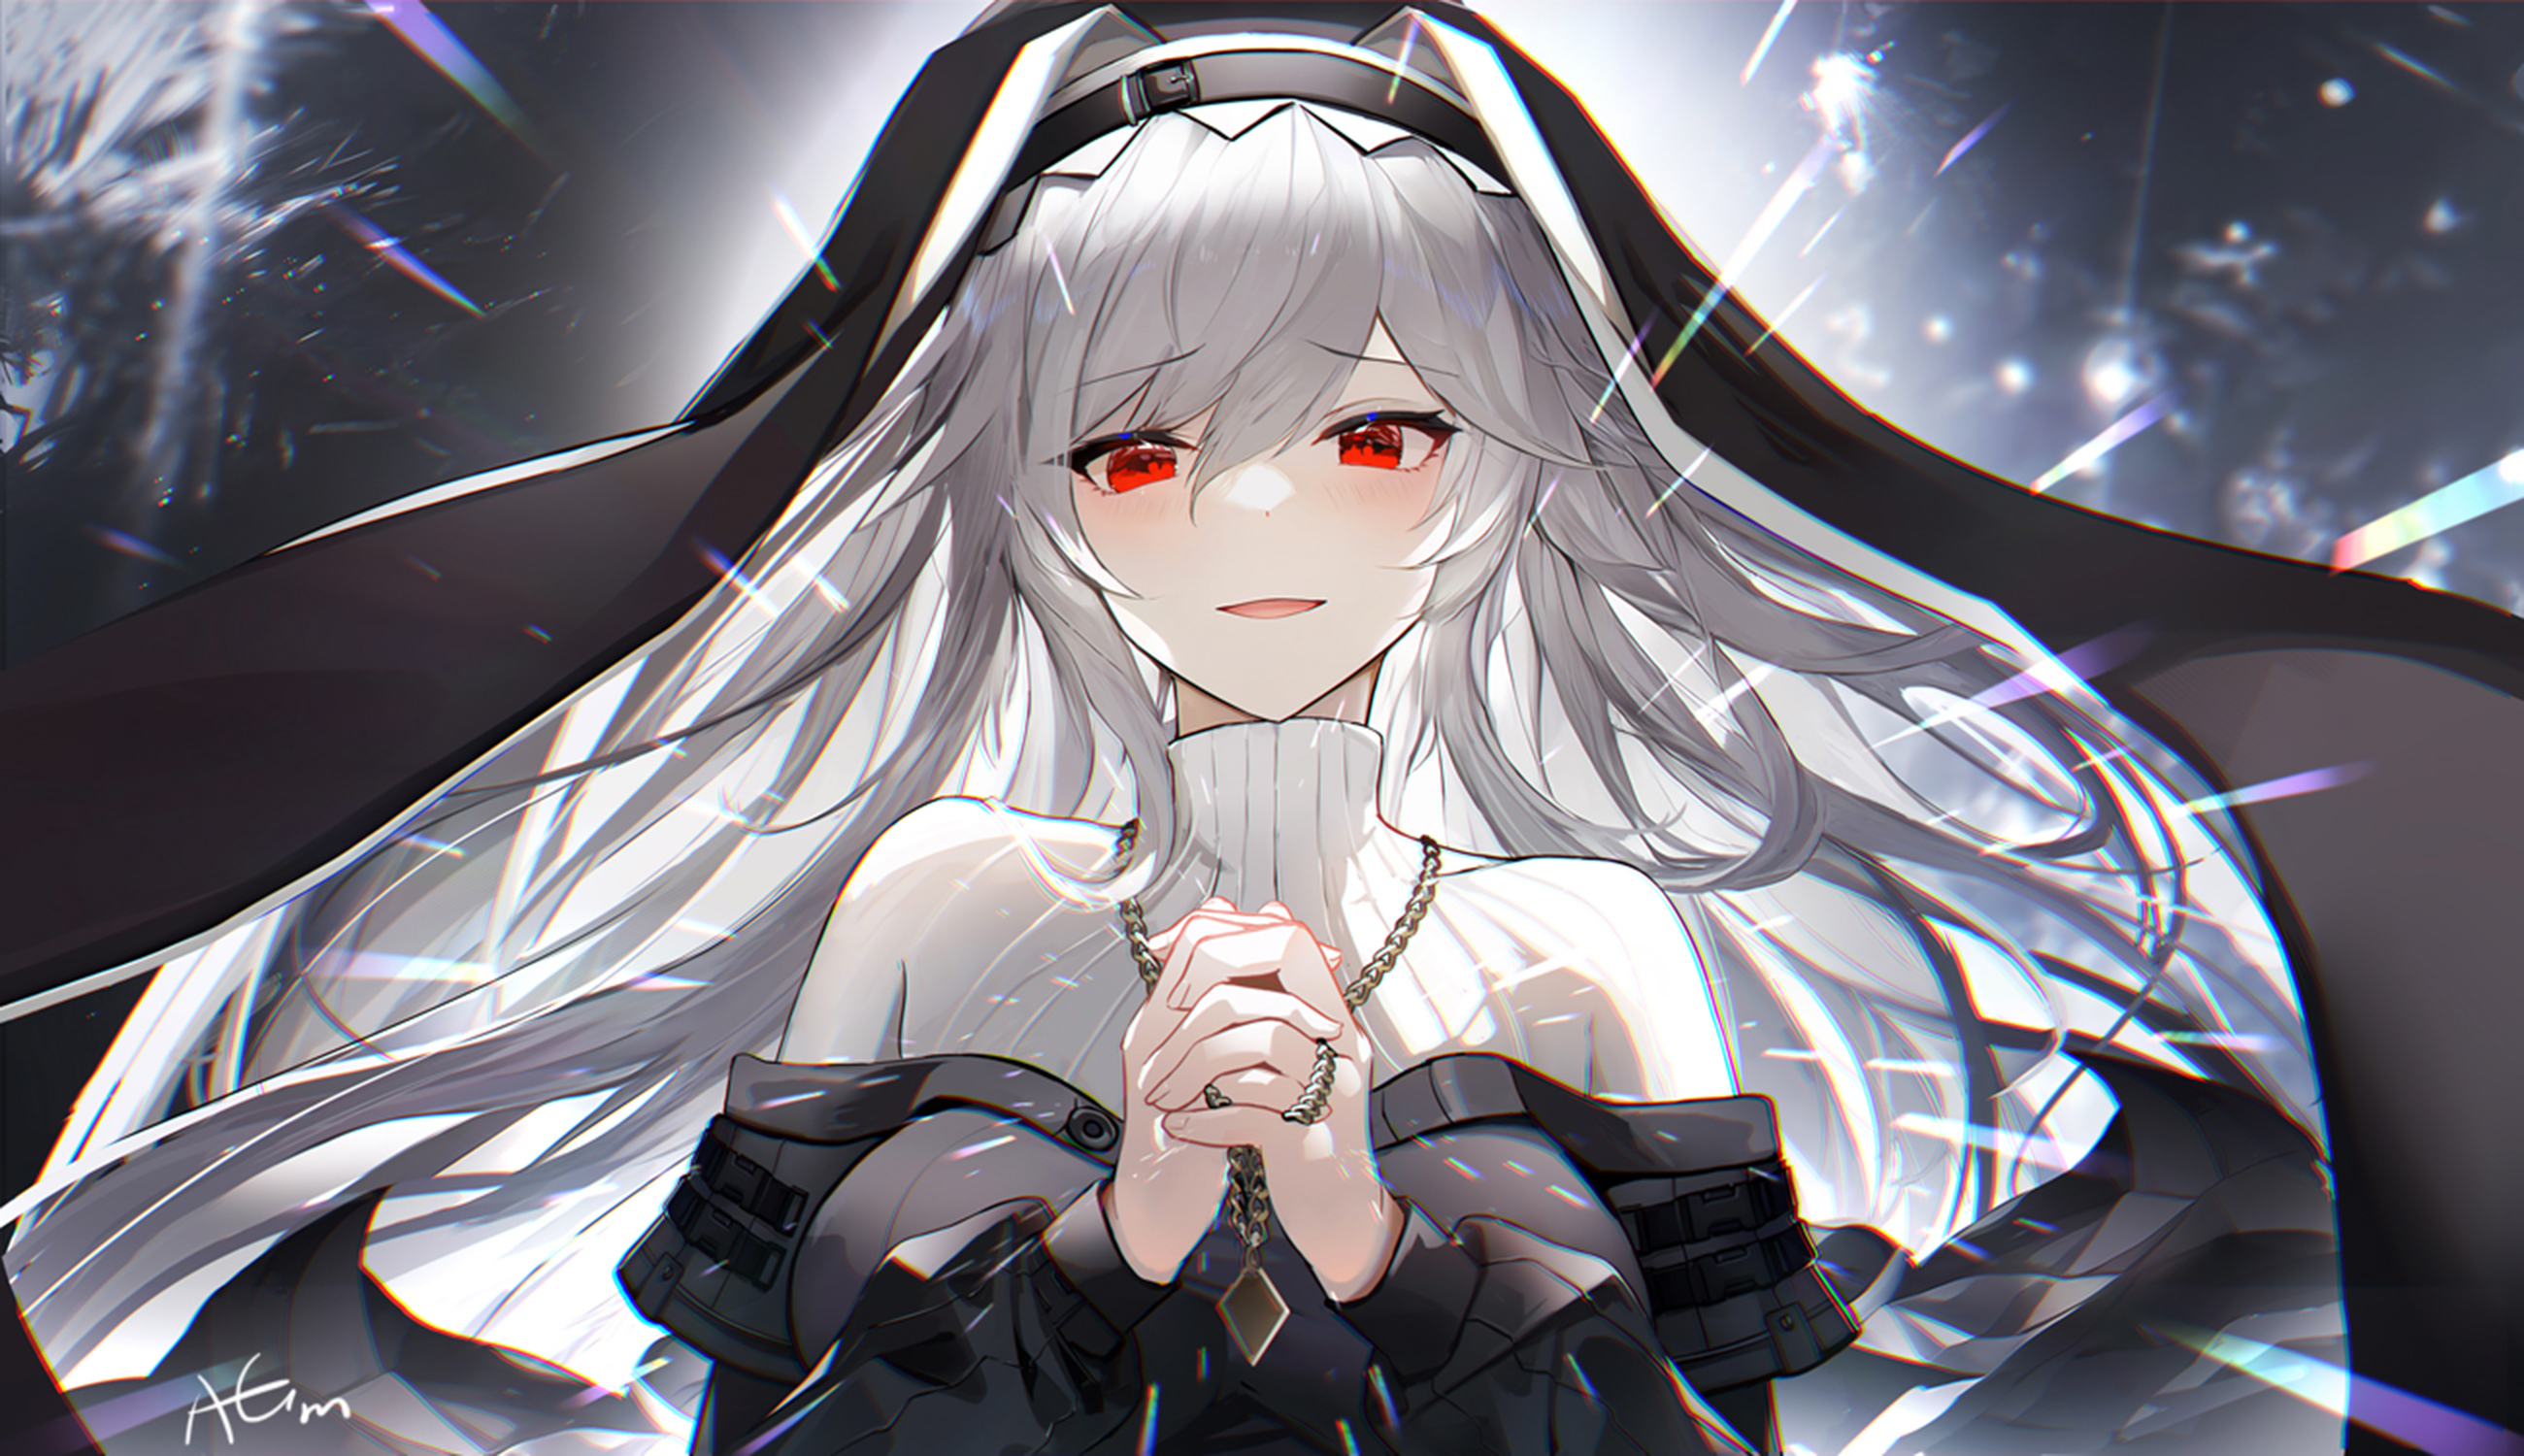 Anime Anime Girls Omone Hokoma Agm White Hair Red Eyes Necklace Nuns Nun Outfit Specter Arknights 2600x1500